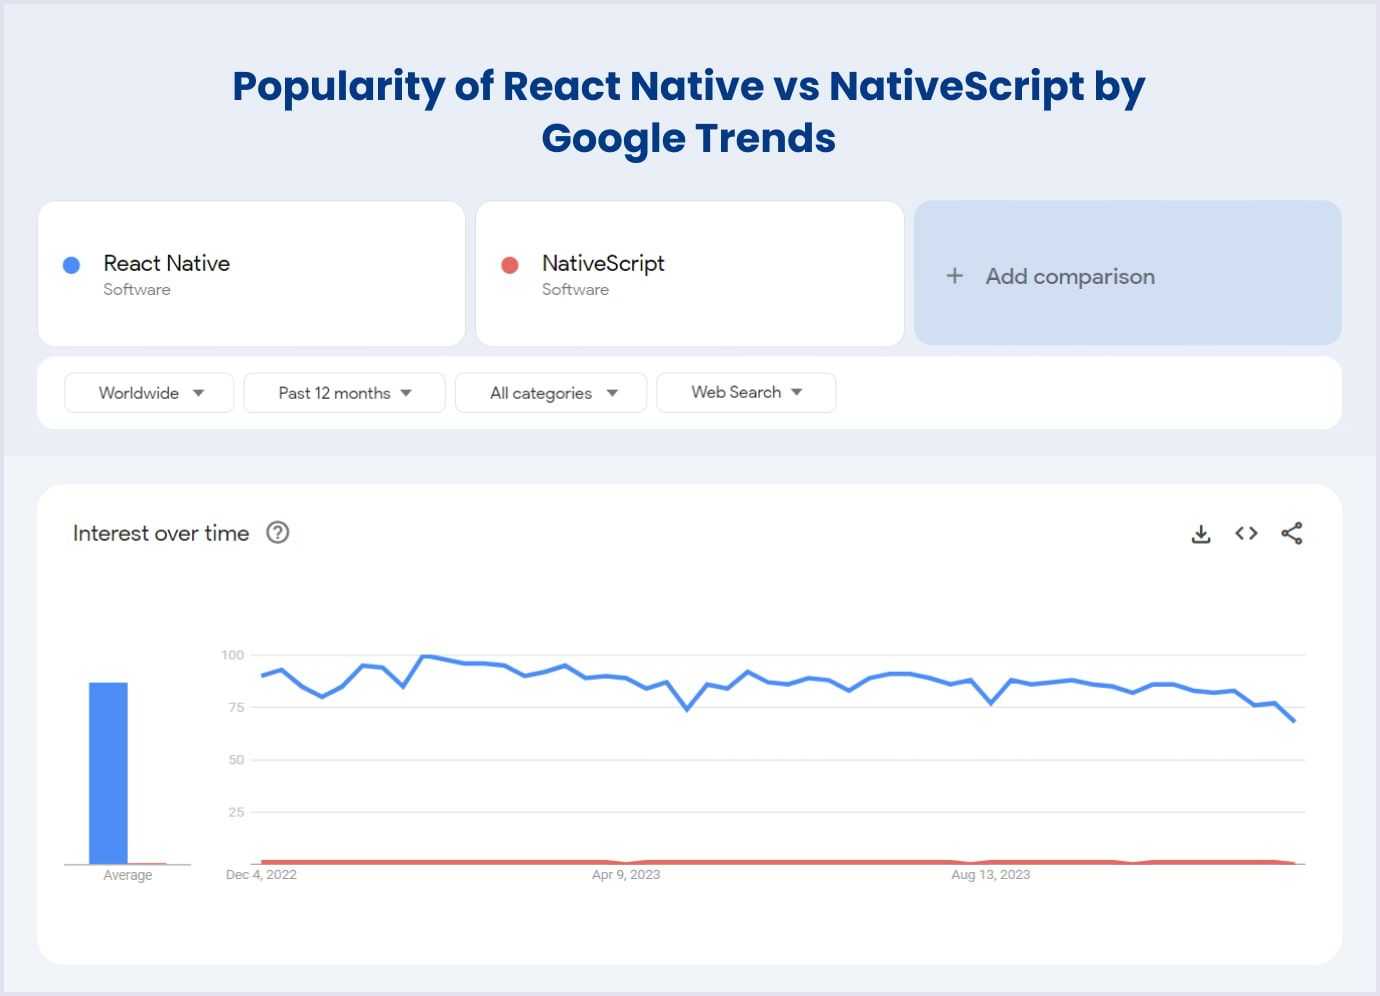 Popularity of the React native vs Nativescript by Google Trends